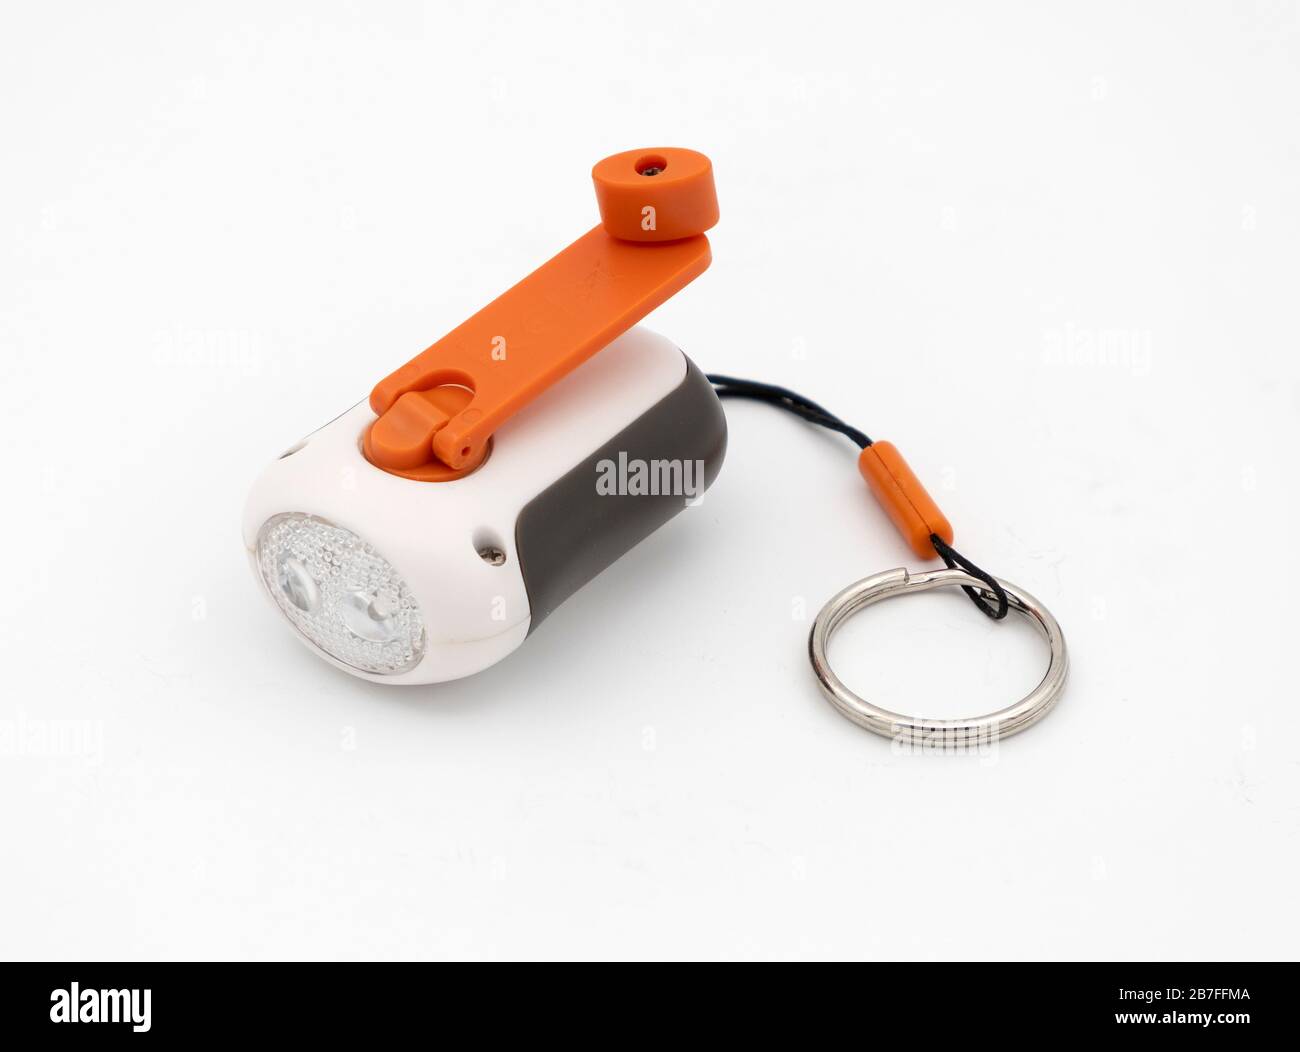 Small keychain size crank wind up flashlight with orange on/off button isolated on white background Stock Photo